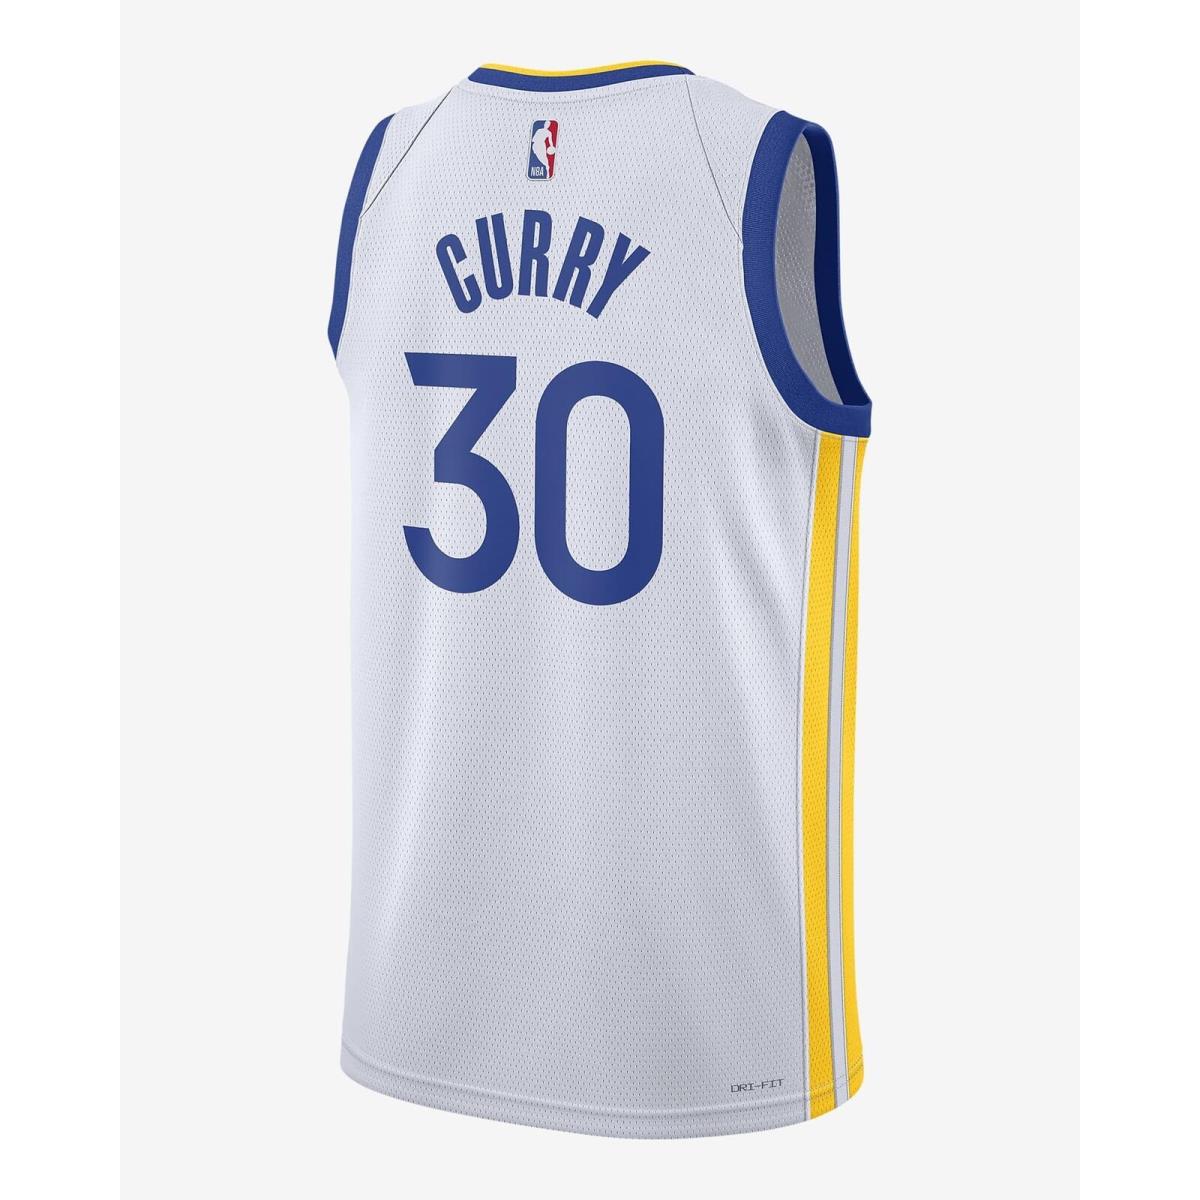 AT4744-100 Mens Nike Nba Golden State Warriors Steph Curry Association Authent